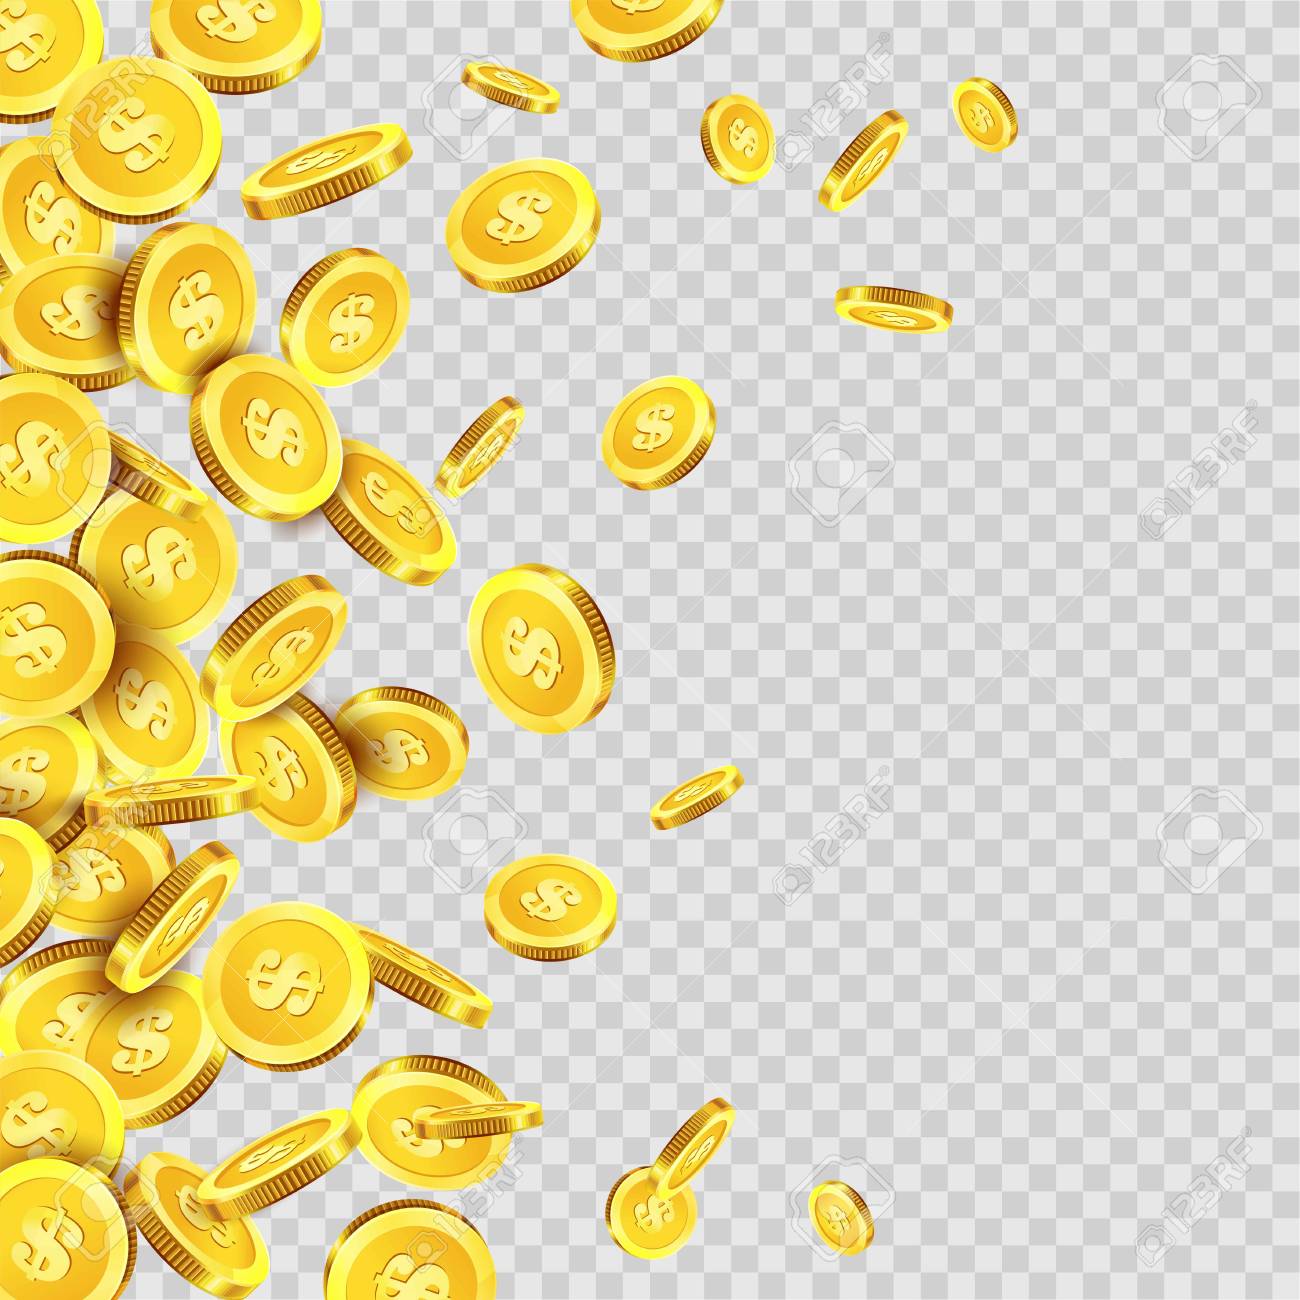 Gold Coins Rain Or Golden Money Coin Pattern On Vector Transparent